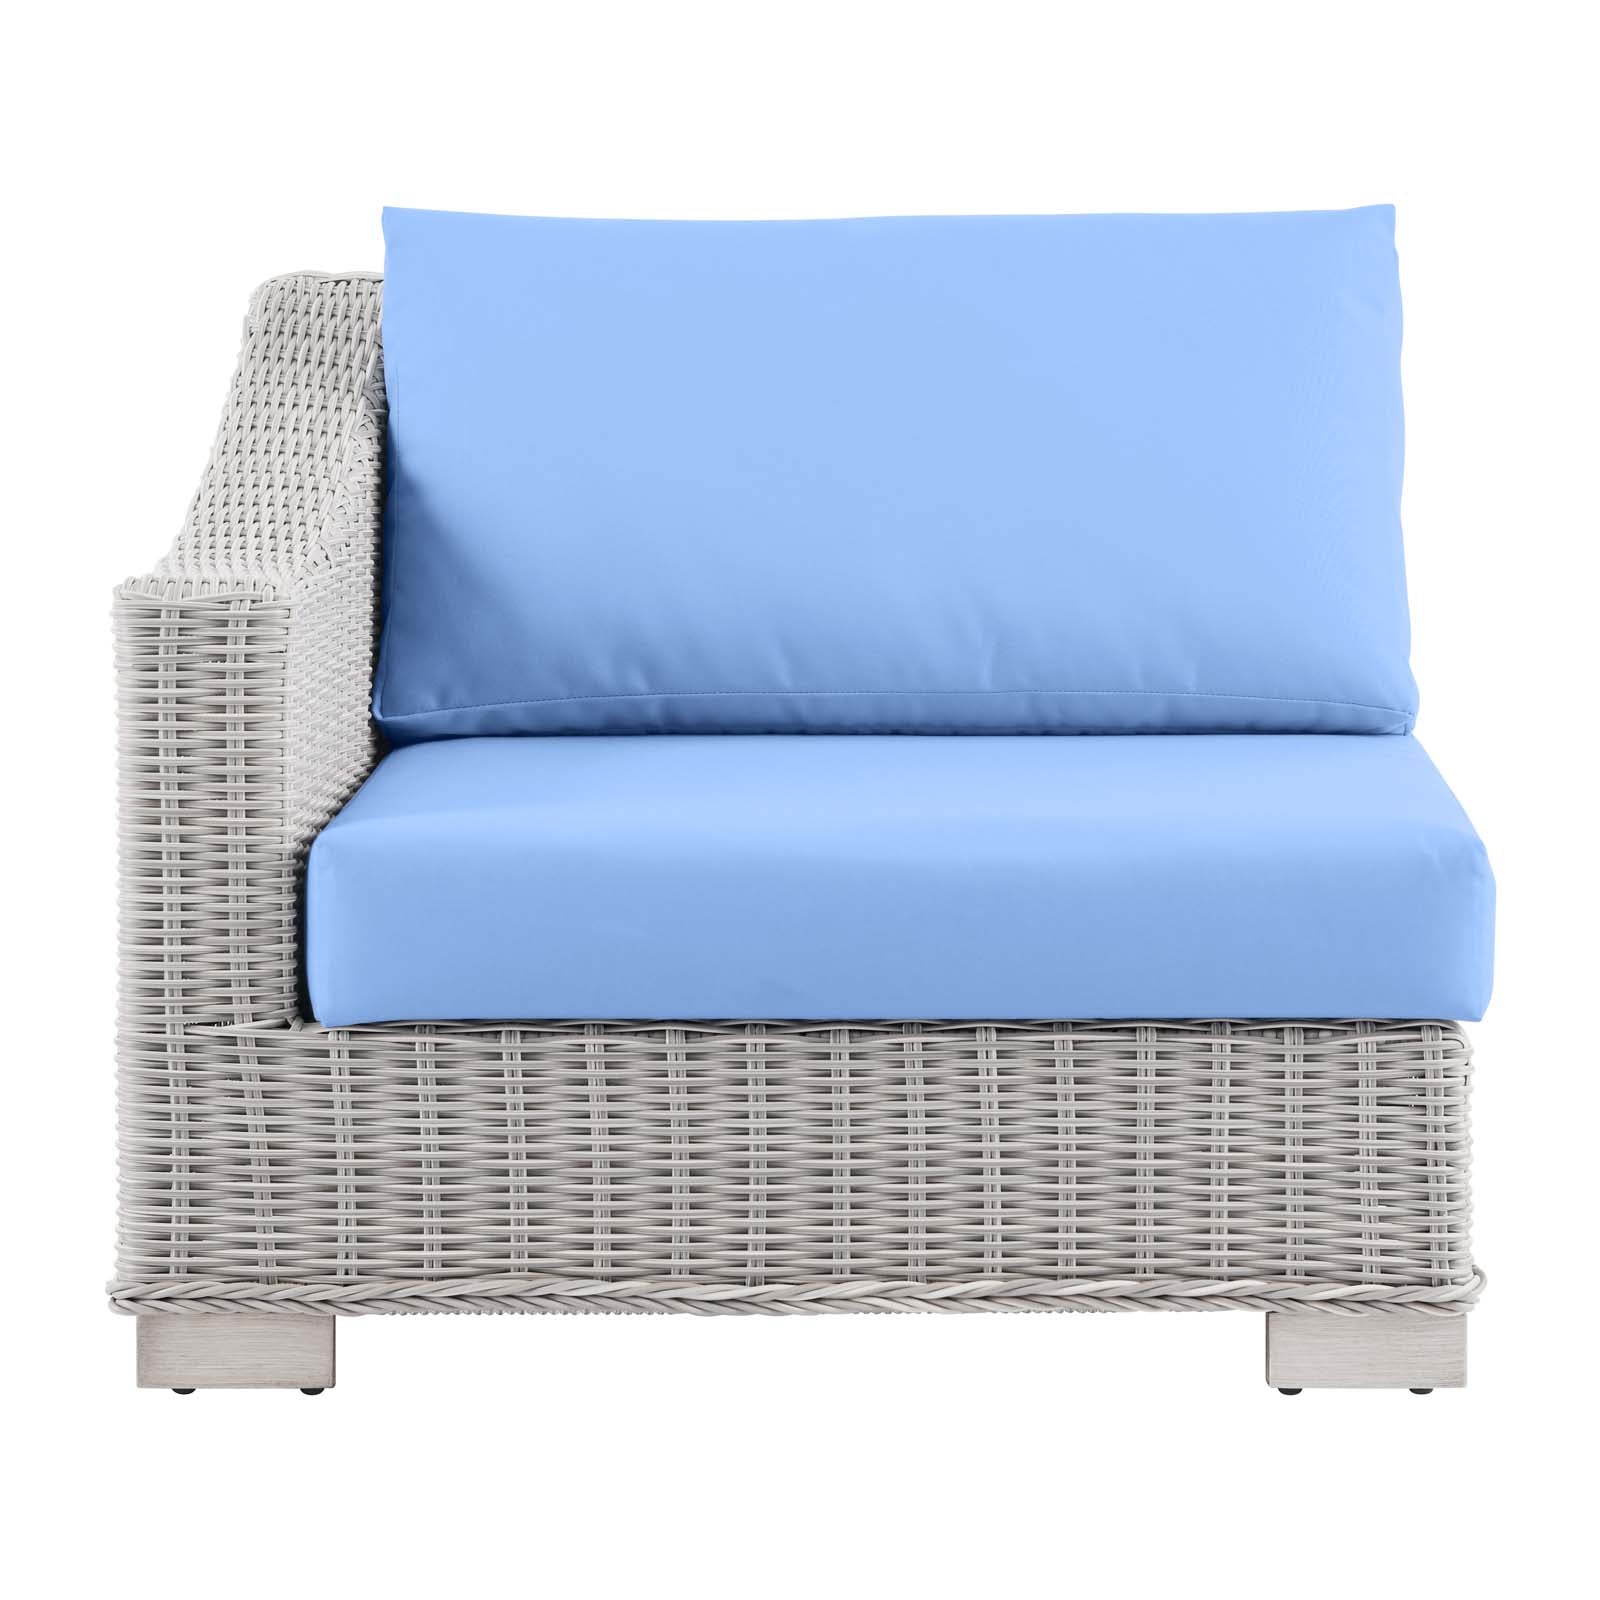 Modway Outdoor Chairs - Conway Outdoor Patio Wicker Rattan Left-Arm Chair Light Gray Light Blue